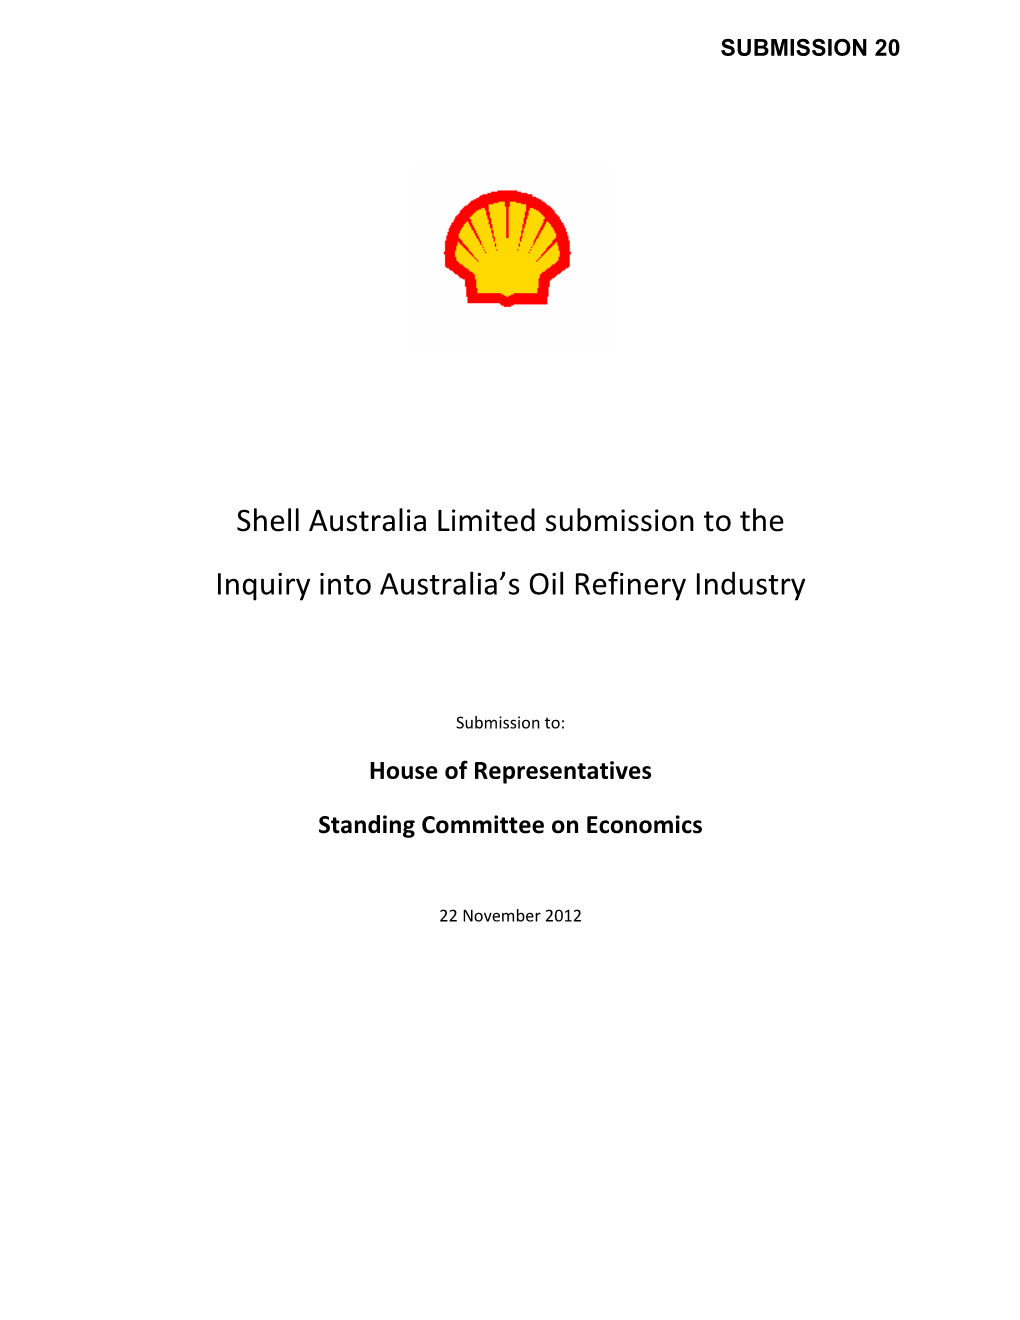 Shell Australia Limited Submission to the Inquiry Into Australia's Oil Refinery Industry